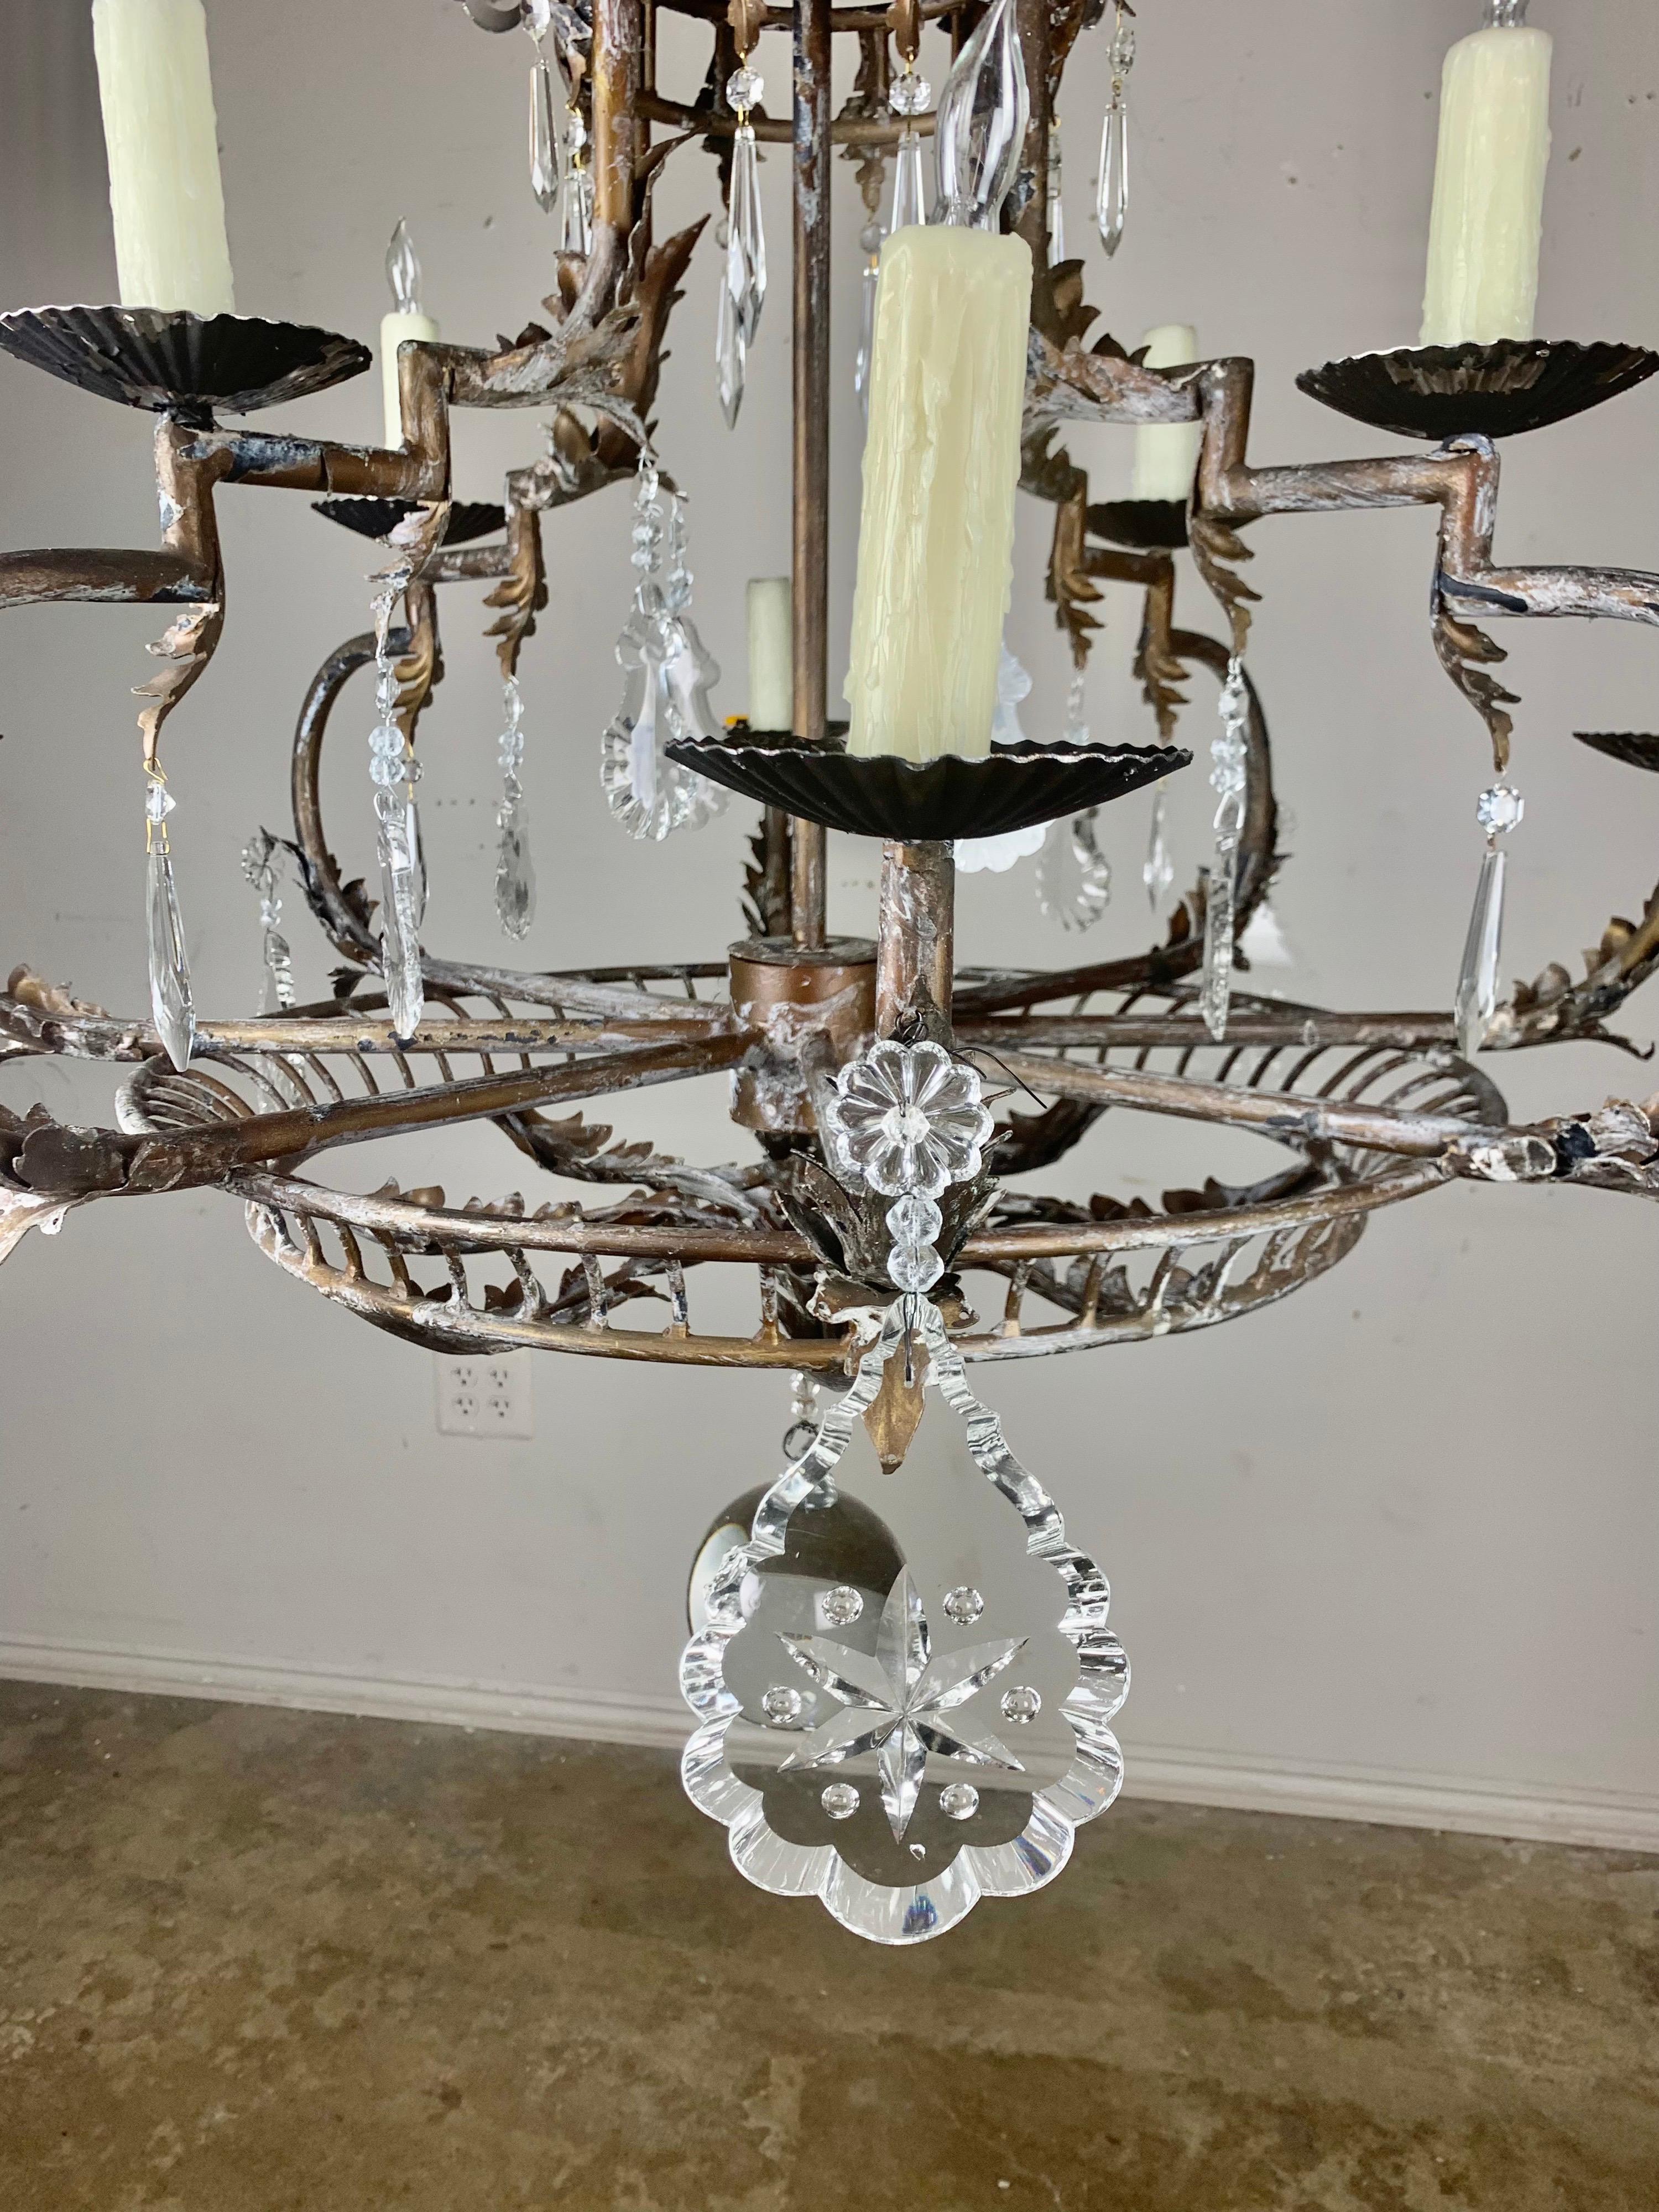 Mid-20th Century Spanish Wrought Iron and Crystal Chandelier 1930's